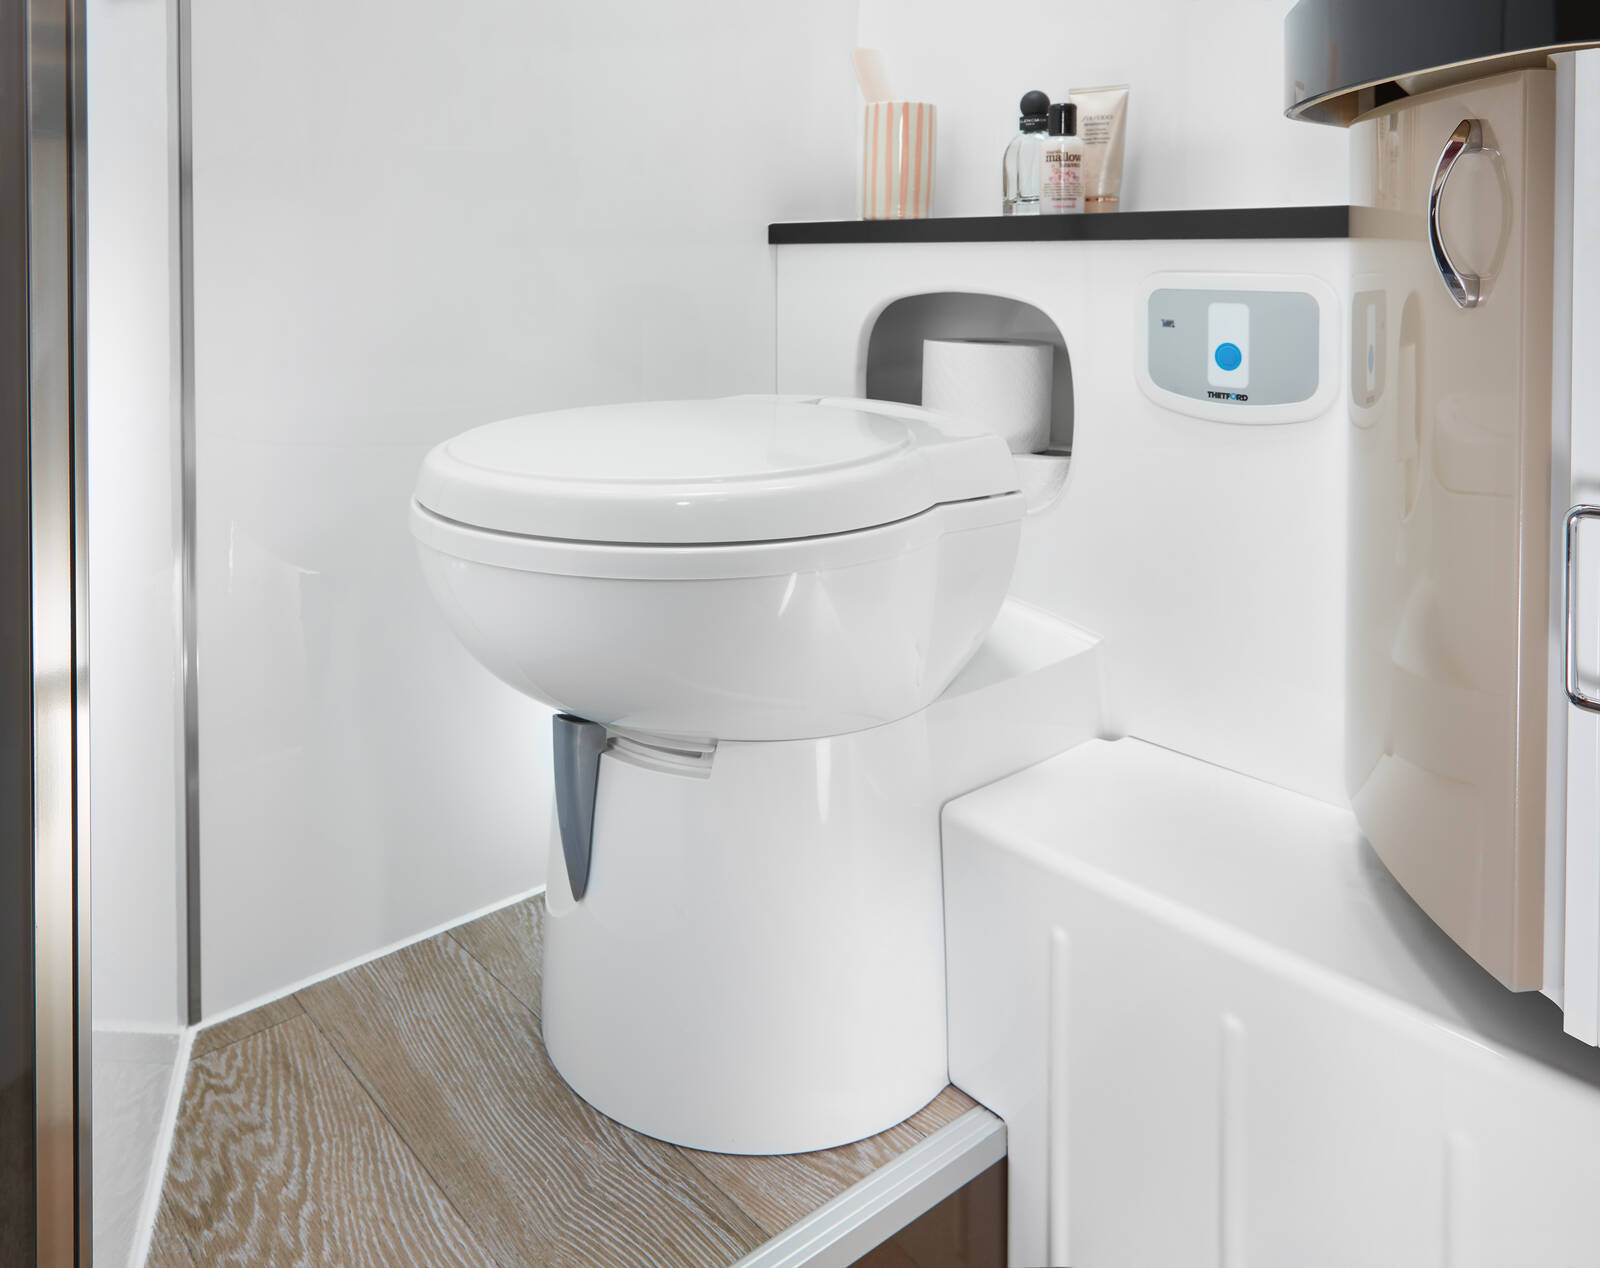 How to operate the toilet in the motorhome? – main image